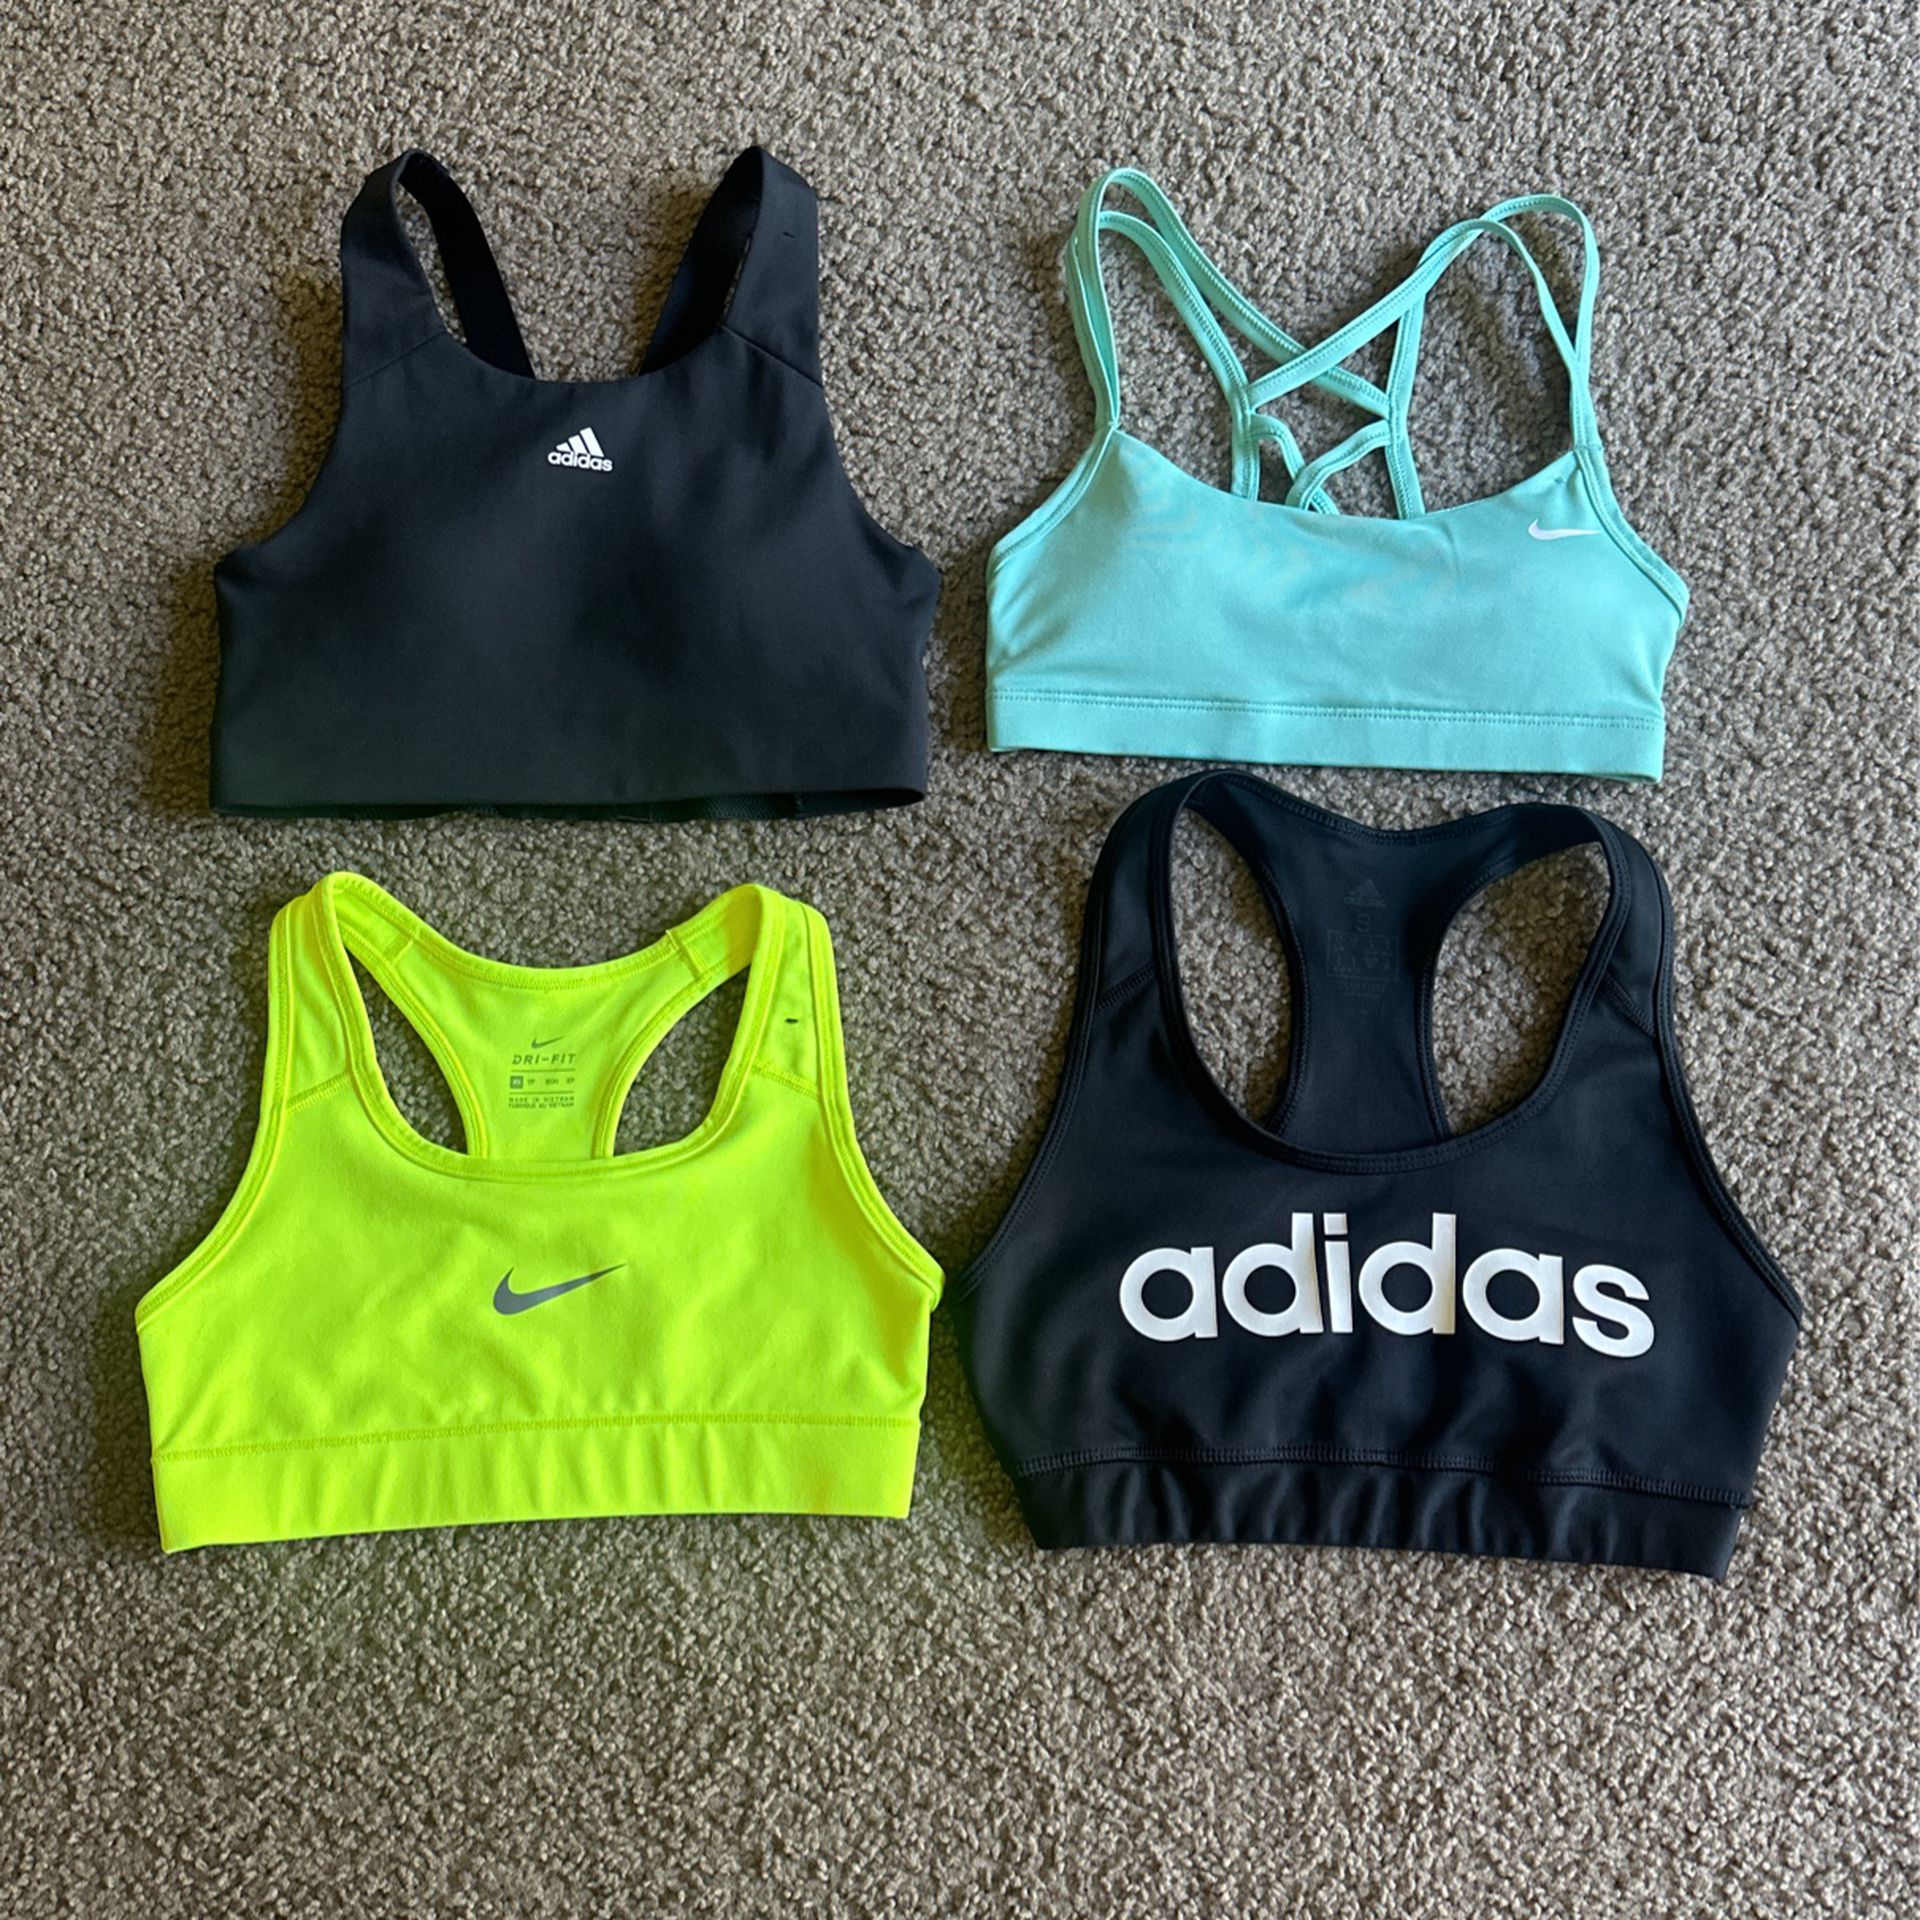 Bundle Adidas & Nike Sport Bras (Size XS) - $25 LOCAL MEETUP ONLY